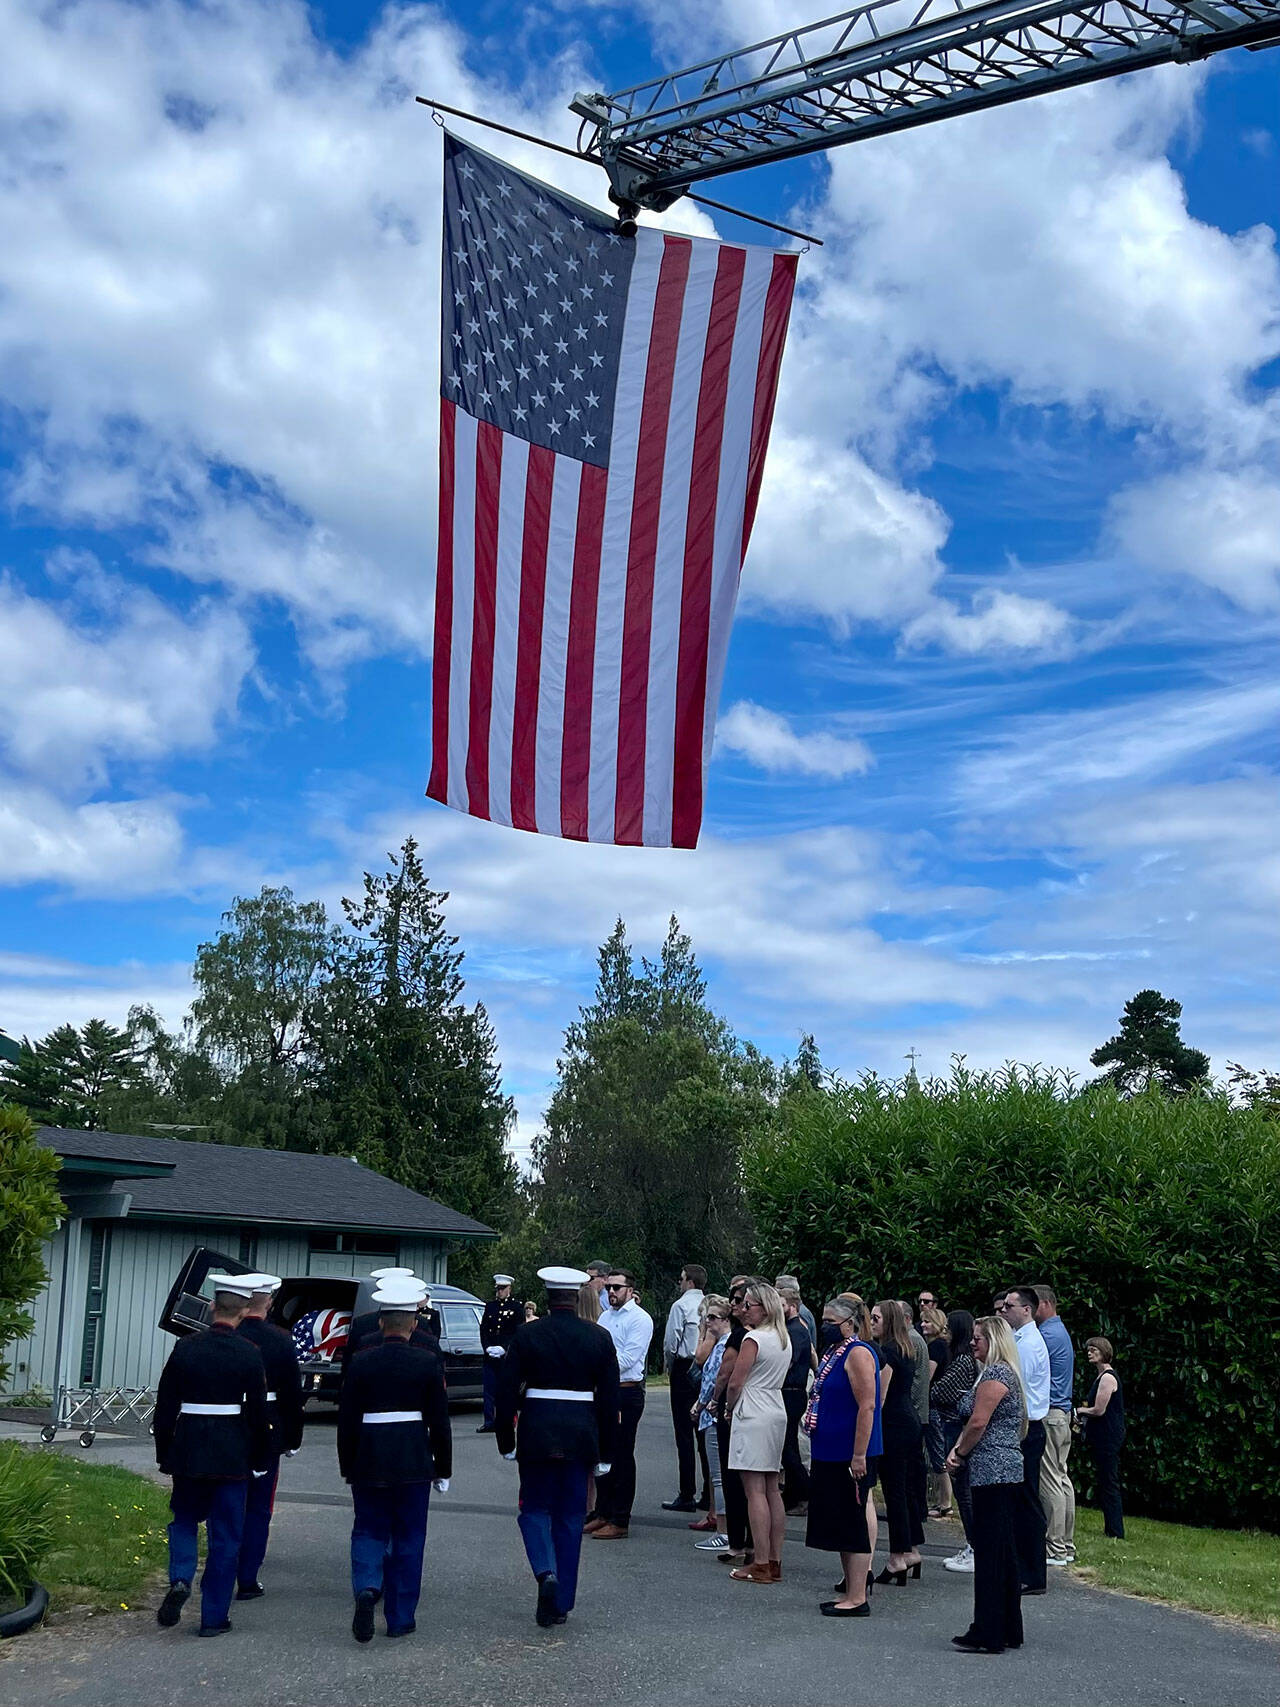 (Jim Whitney Photo) A solemn procession for islander Sam Yates concluded at Island Funeral Service, where an American flag was unfurled on Vashon Island Fire & Rescue’s ladder truck.